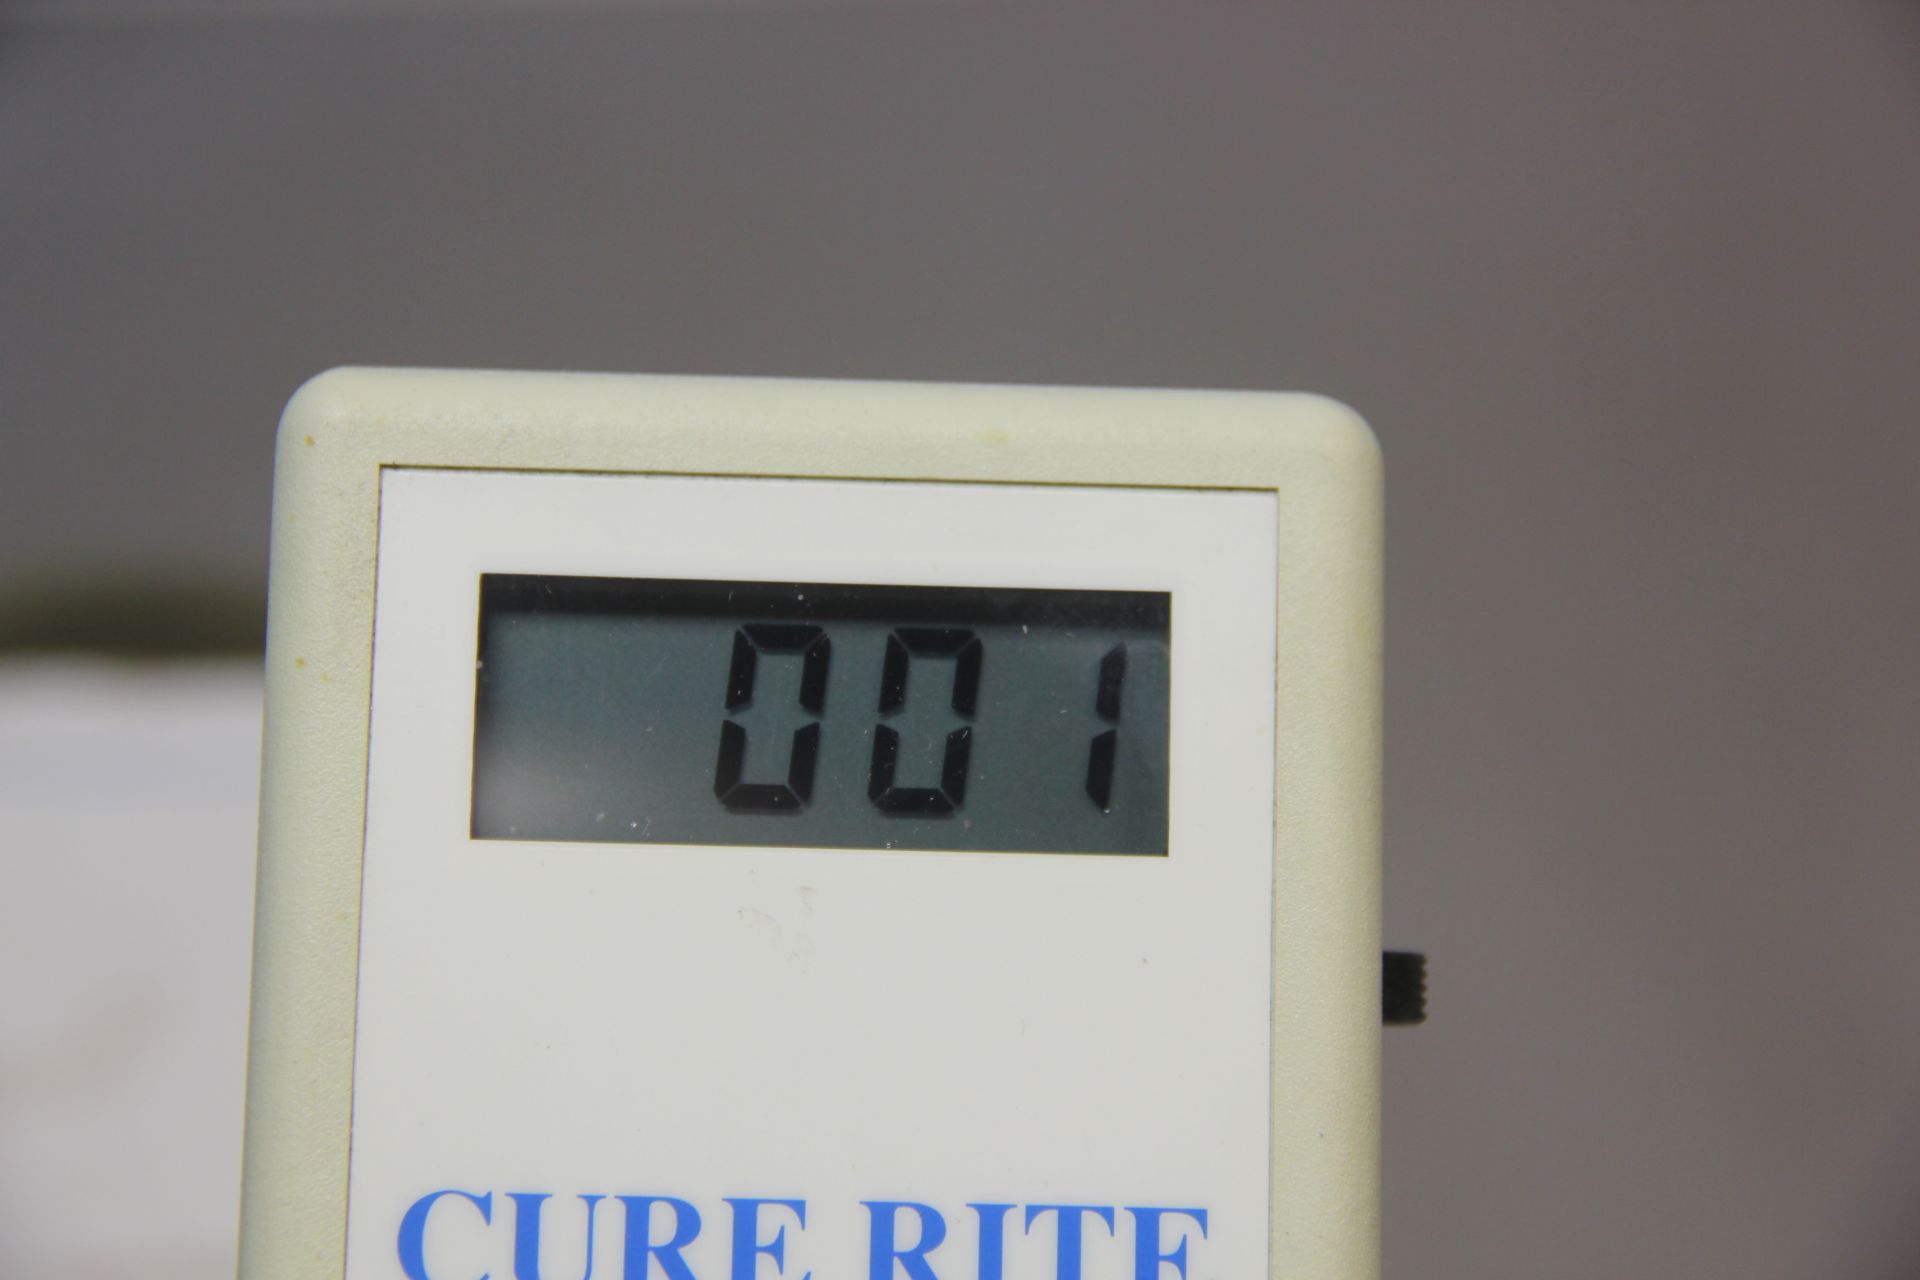 EFOS CURE RITE RADIOMETER VISIBLE CURING LIGHT METER - Image 4 of 5